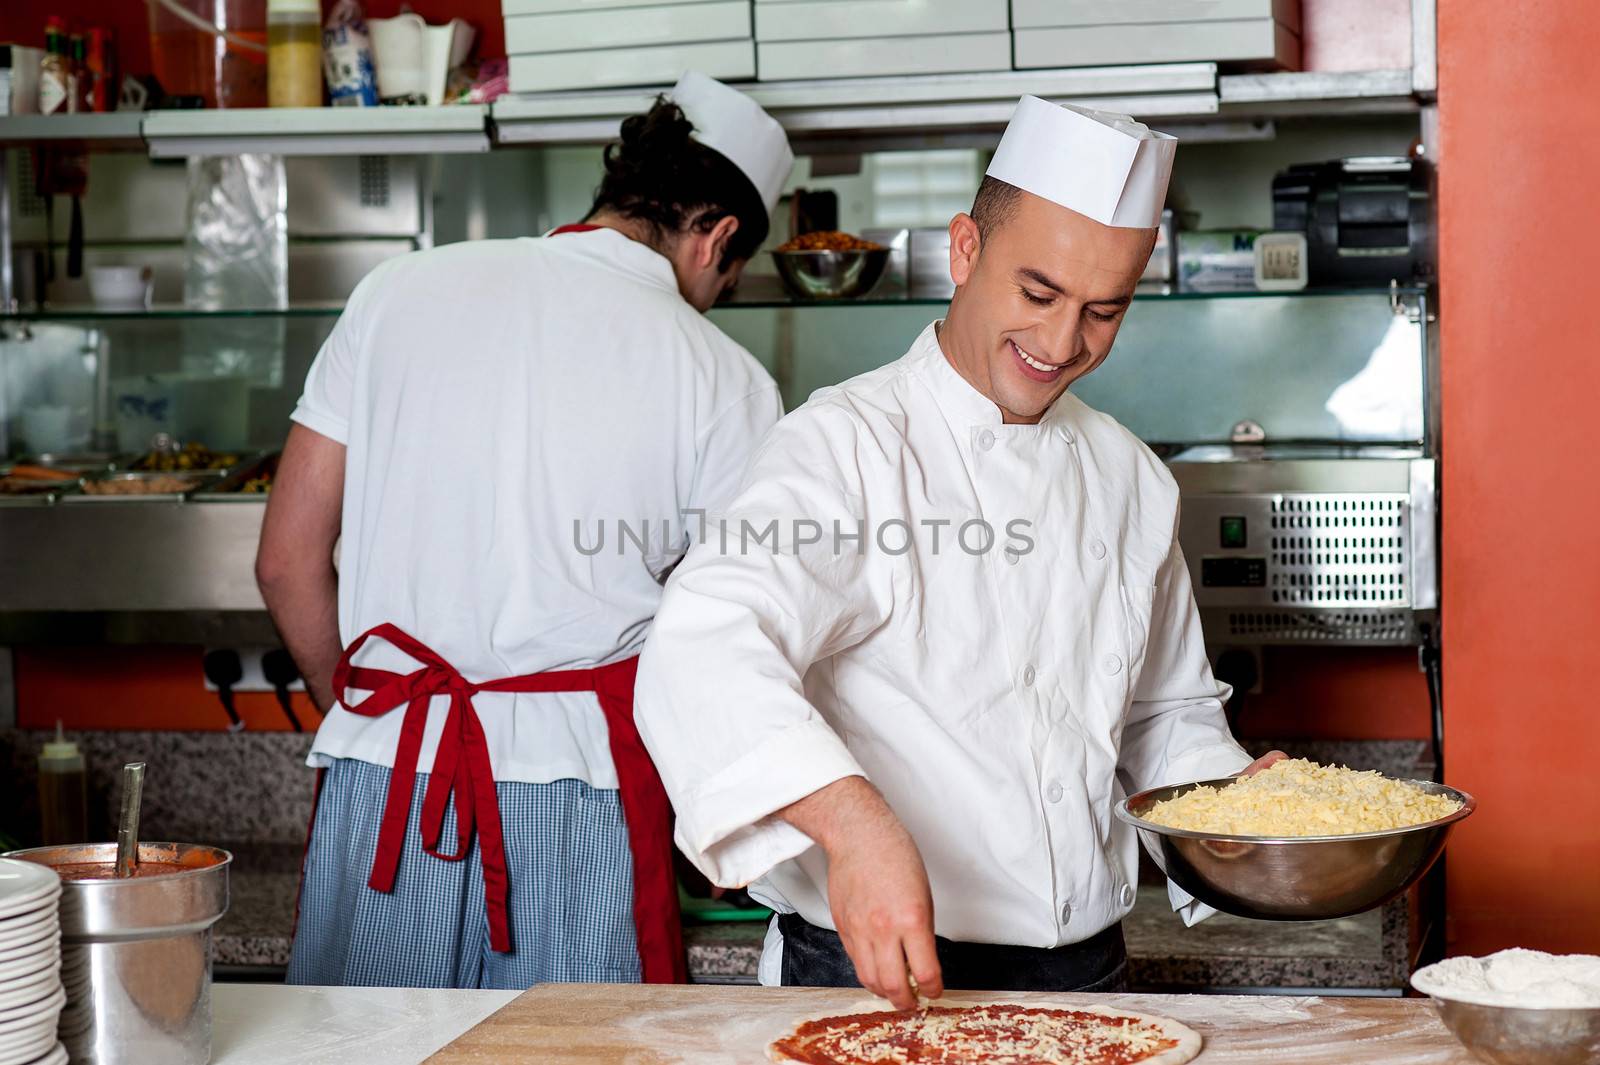 Expert chefs at work inside restaurant kitchen by stockyimages